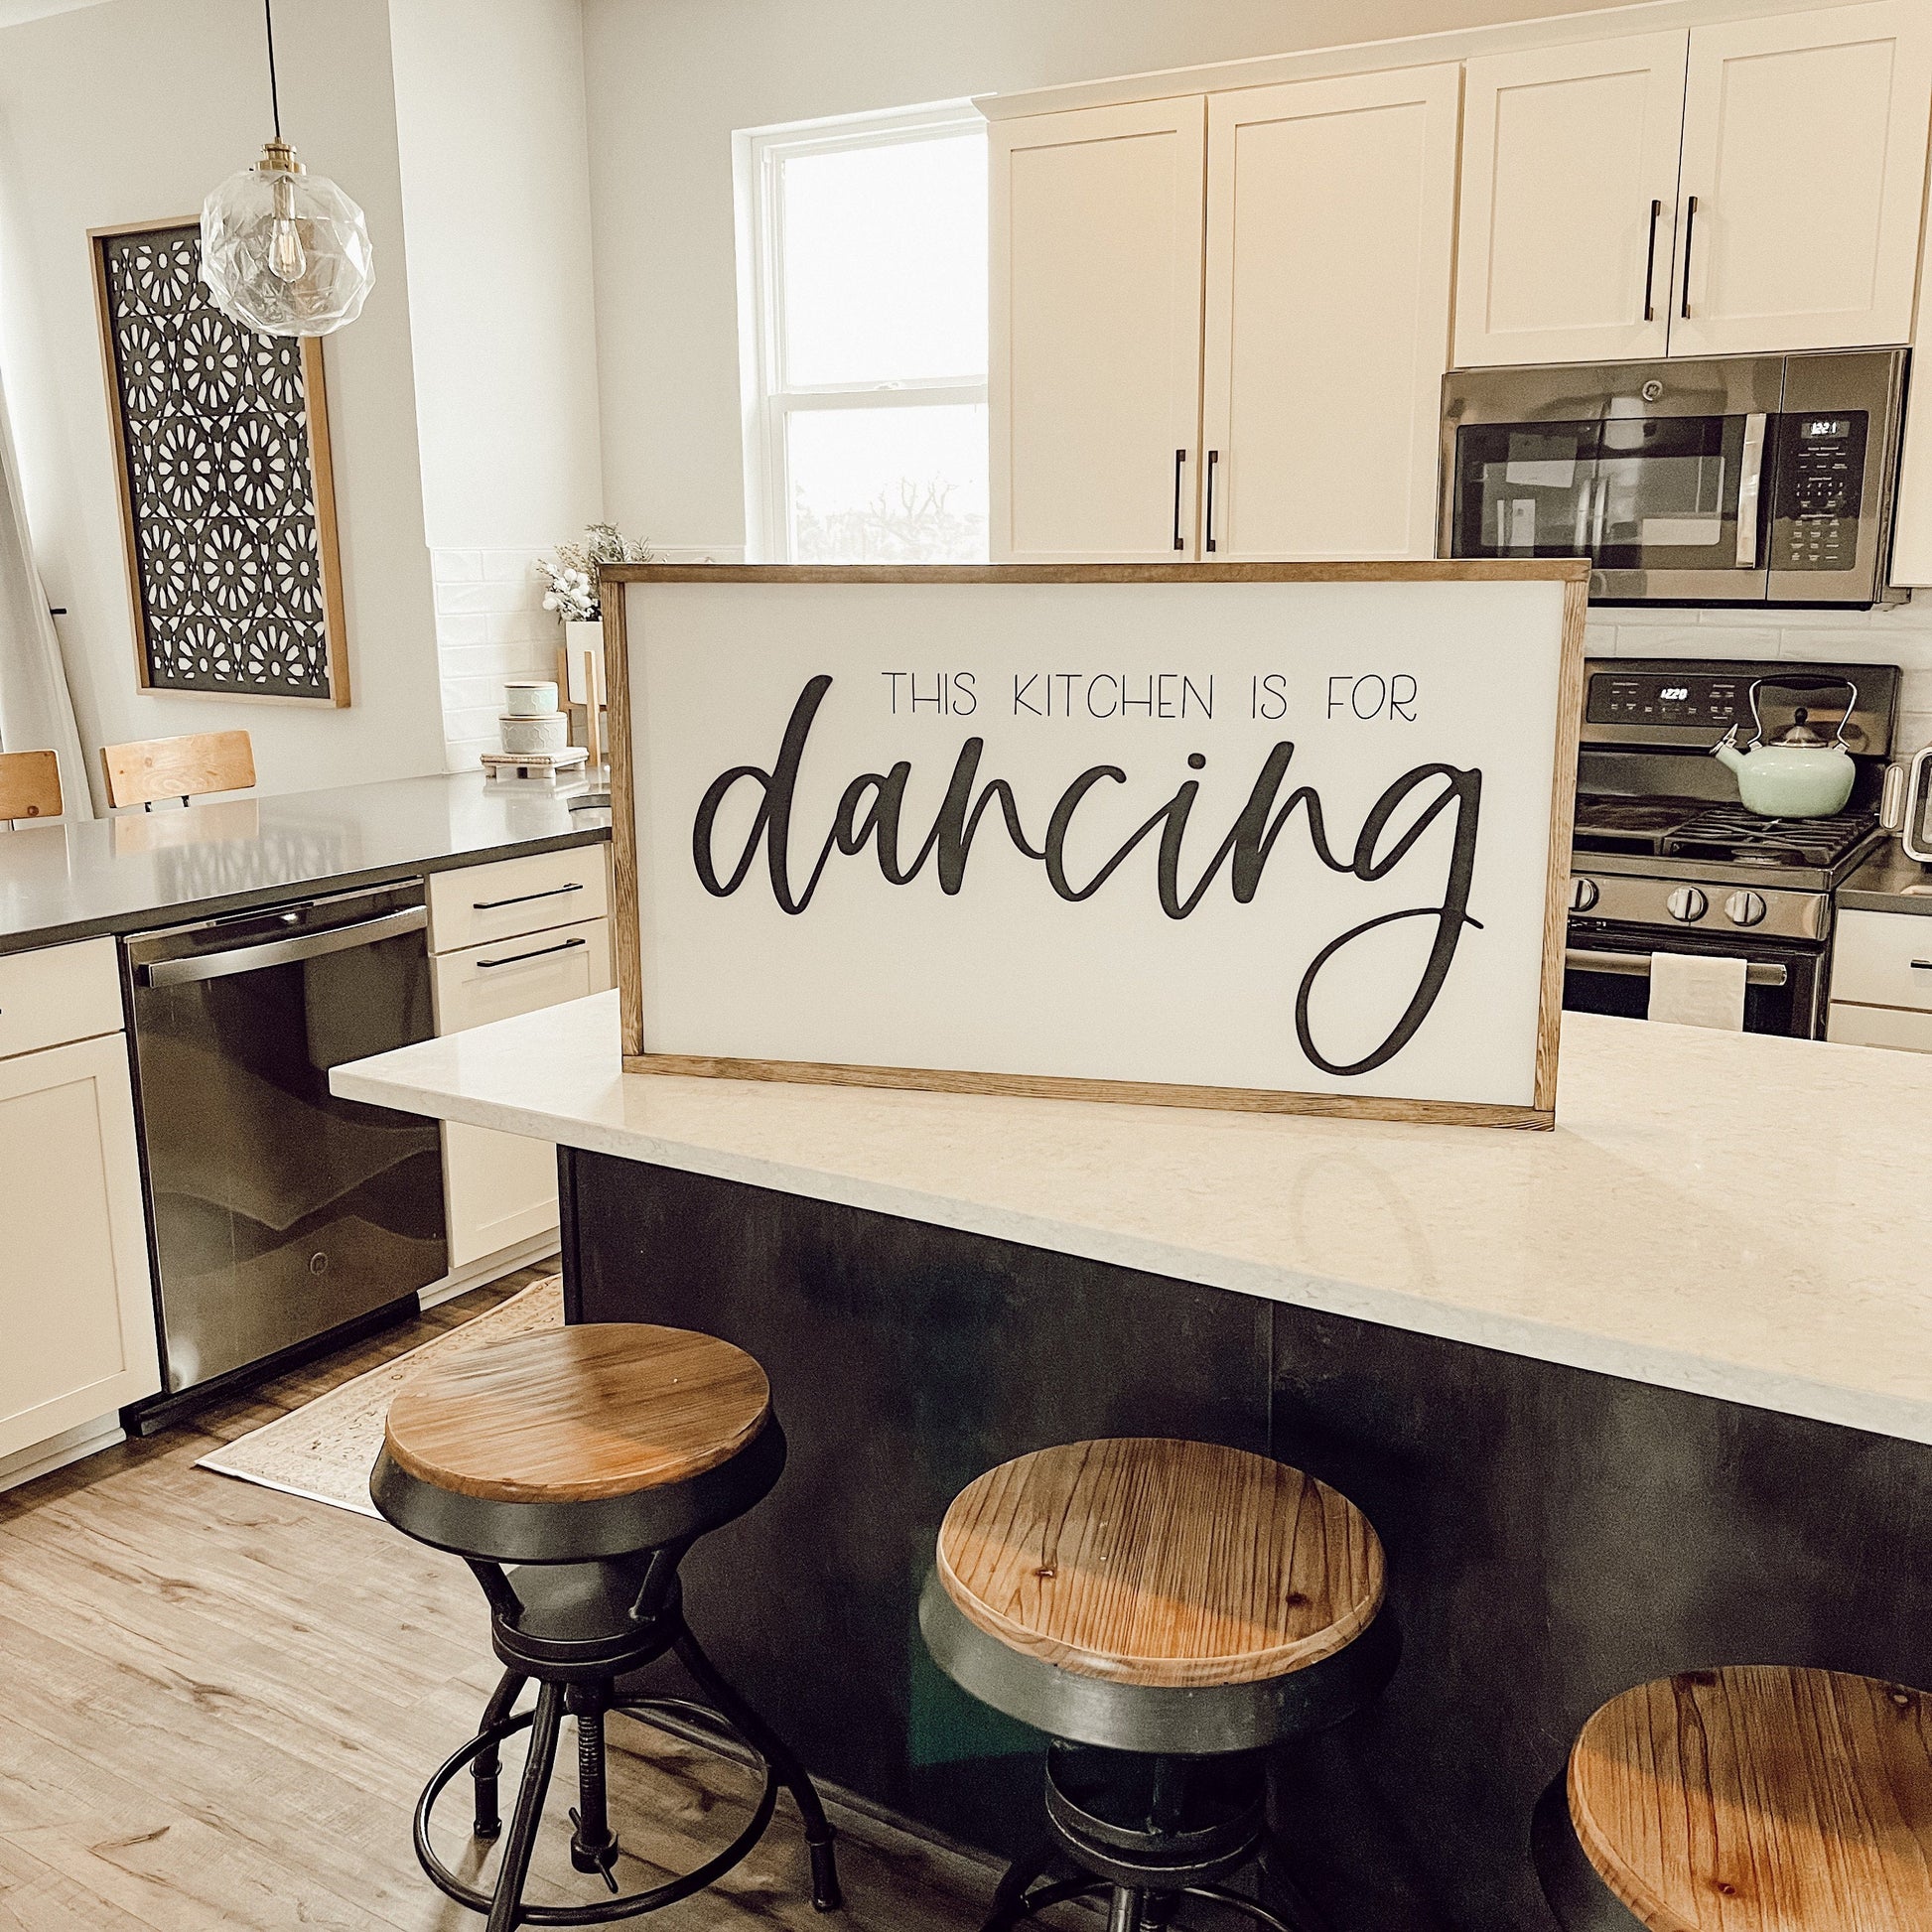 this kitchen is for dancing - wood sign - kitchen decor [FREE SHIPPING!]